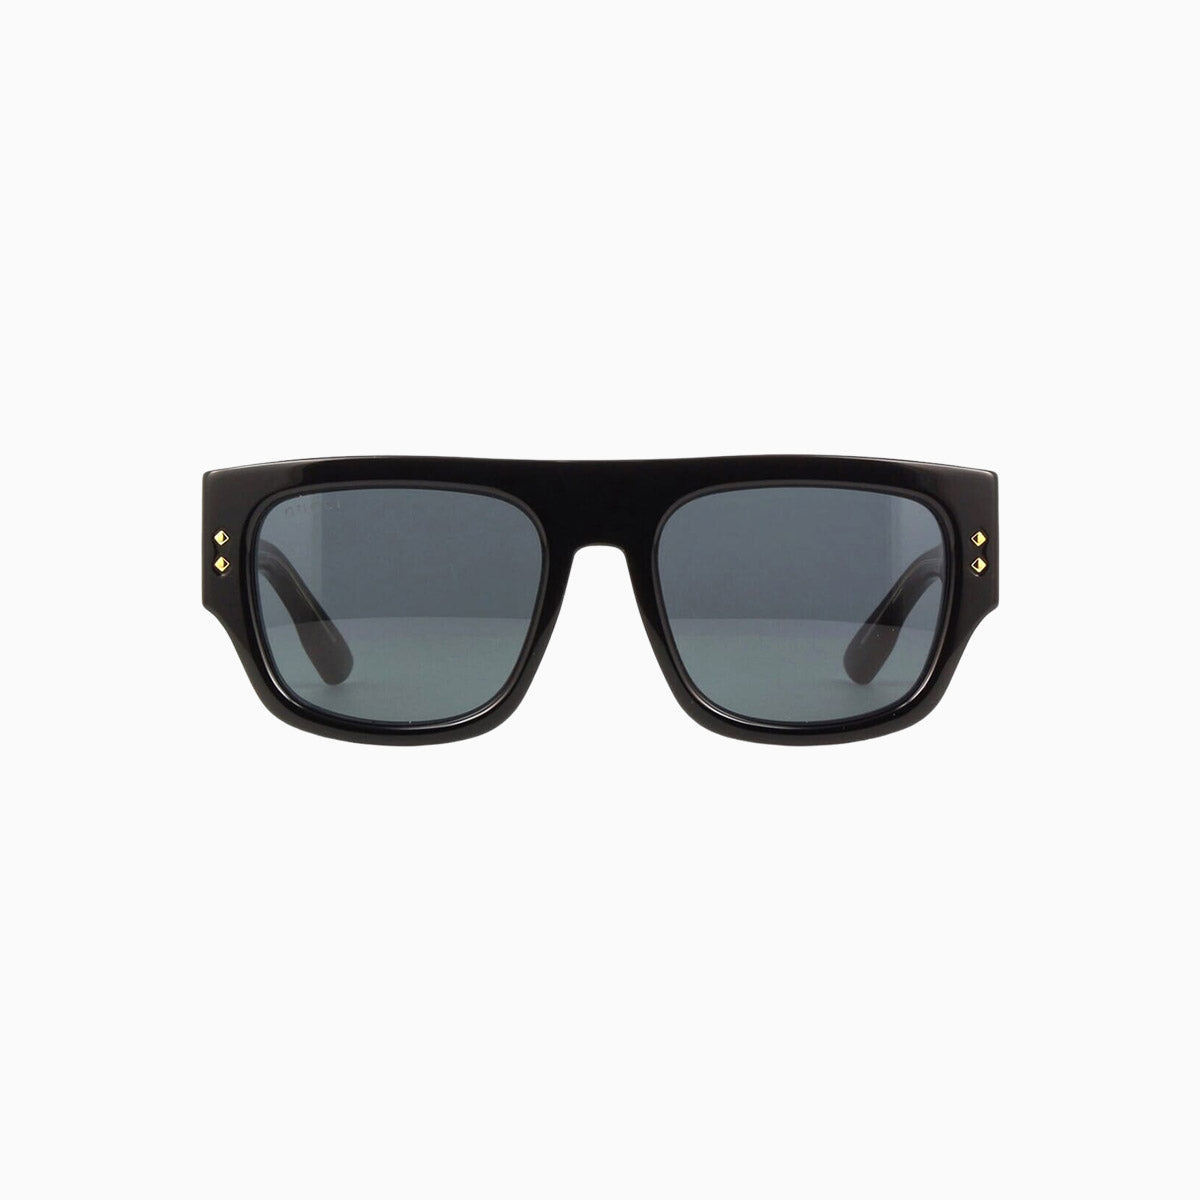 mens-recycled-ace-man-sunglasses-gg1262s-001